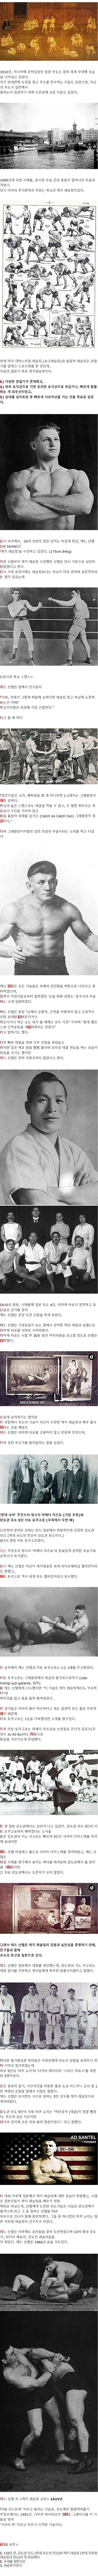 Judo and Lessling's first meeting 110 years ago